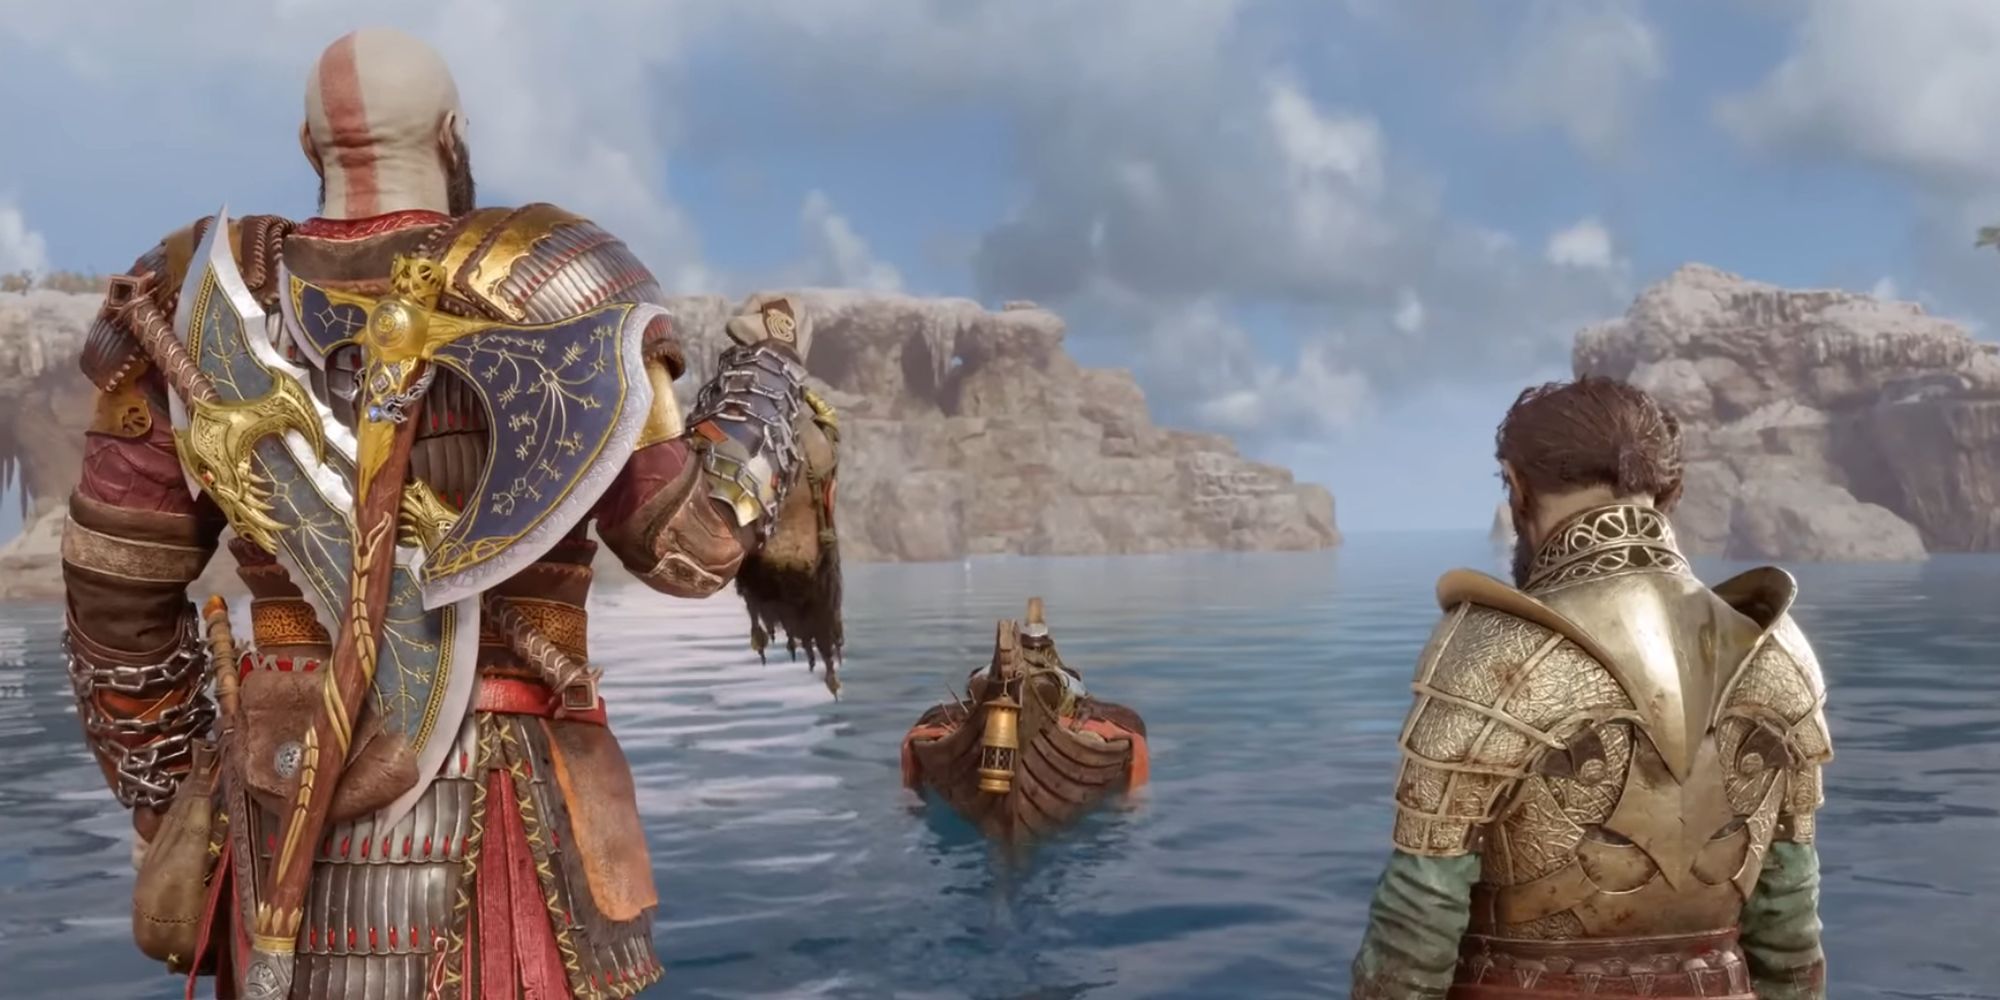 Kratos holding Mimir's head and standing next to Sindri. All three stand watching as Brok's body pushes forward on a boat.